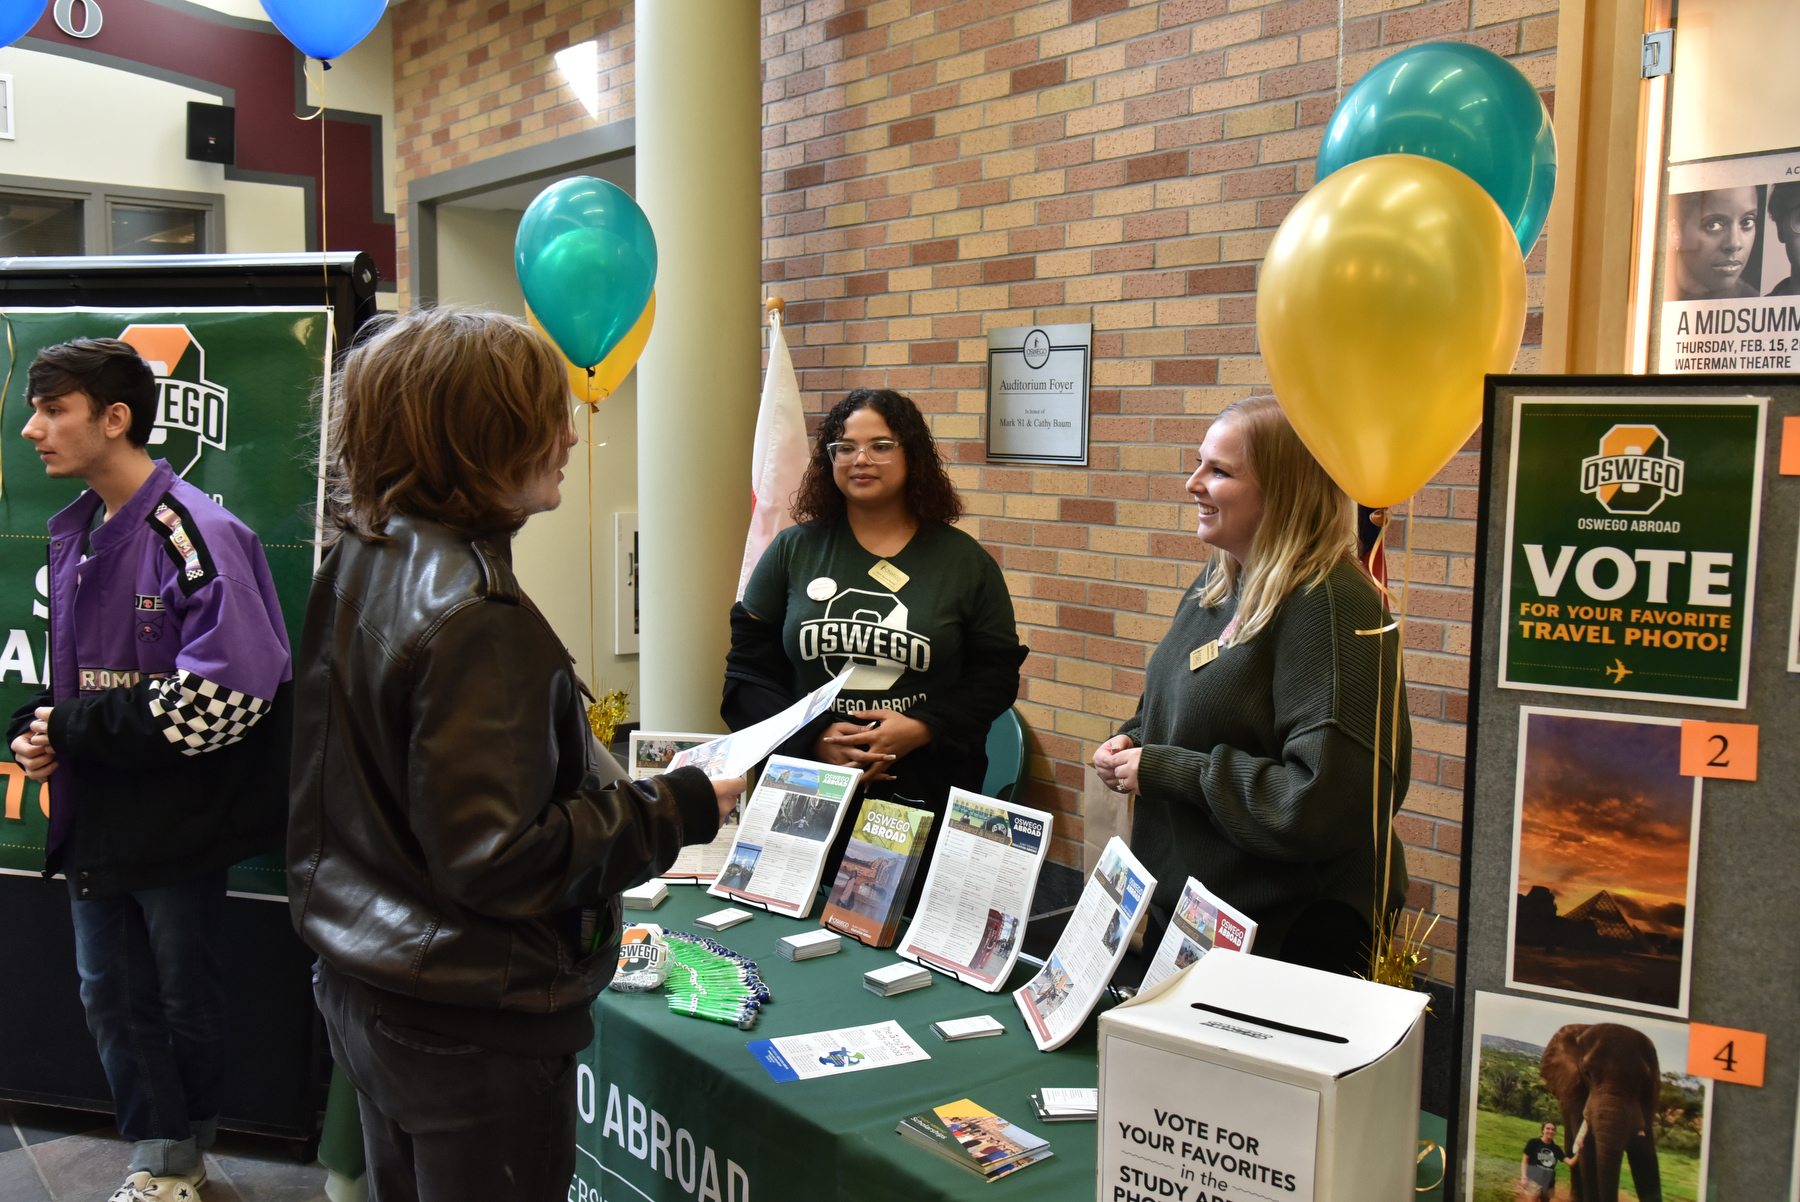 Interested students were invited to visit the Spring Study Abroad Fair Feb. 14 to explore faculty-led (one to three weeks) summer, semester, academic year and internship programs. Study Abroad has opportunities for all majors, all over the world. Psychology major Quinton Longworth, at left, gathers info about study abroad opportunities from one of SUNY Oswego's Study Abroad Mentors, Johnnise Crespo (center) of the global and international studies program and Alyssa Chamberlain from Education Abroad.